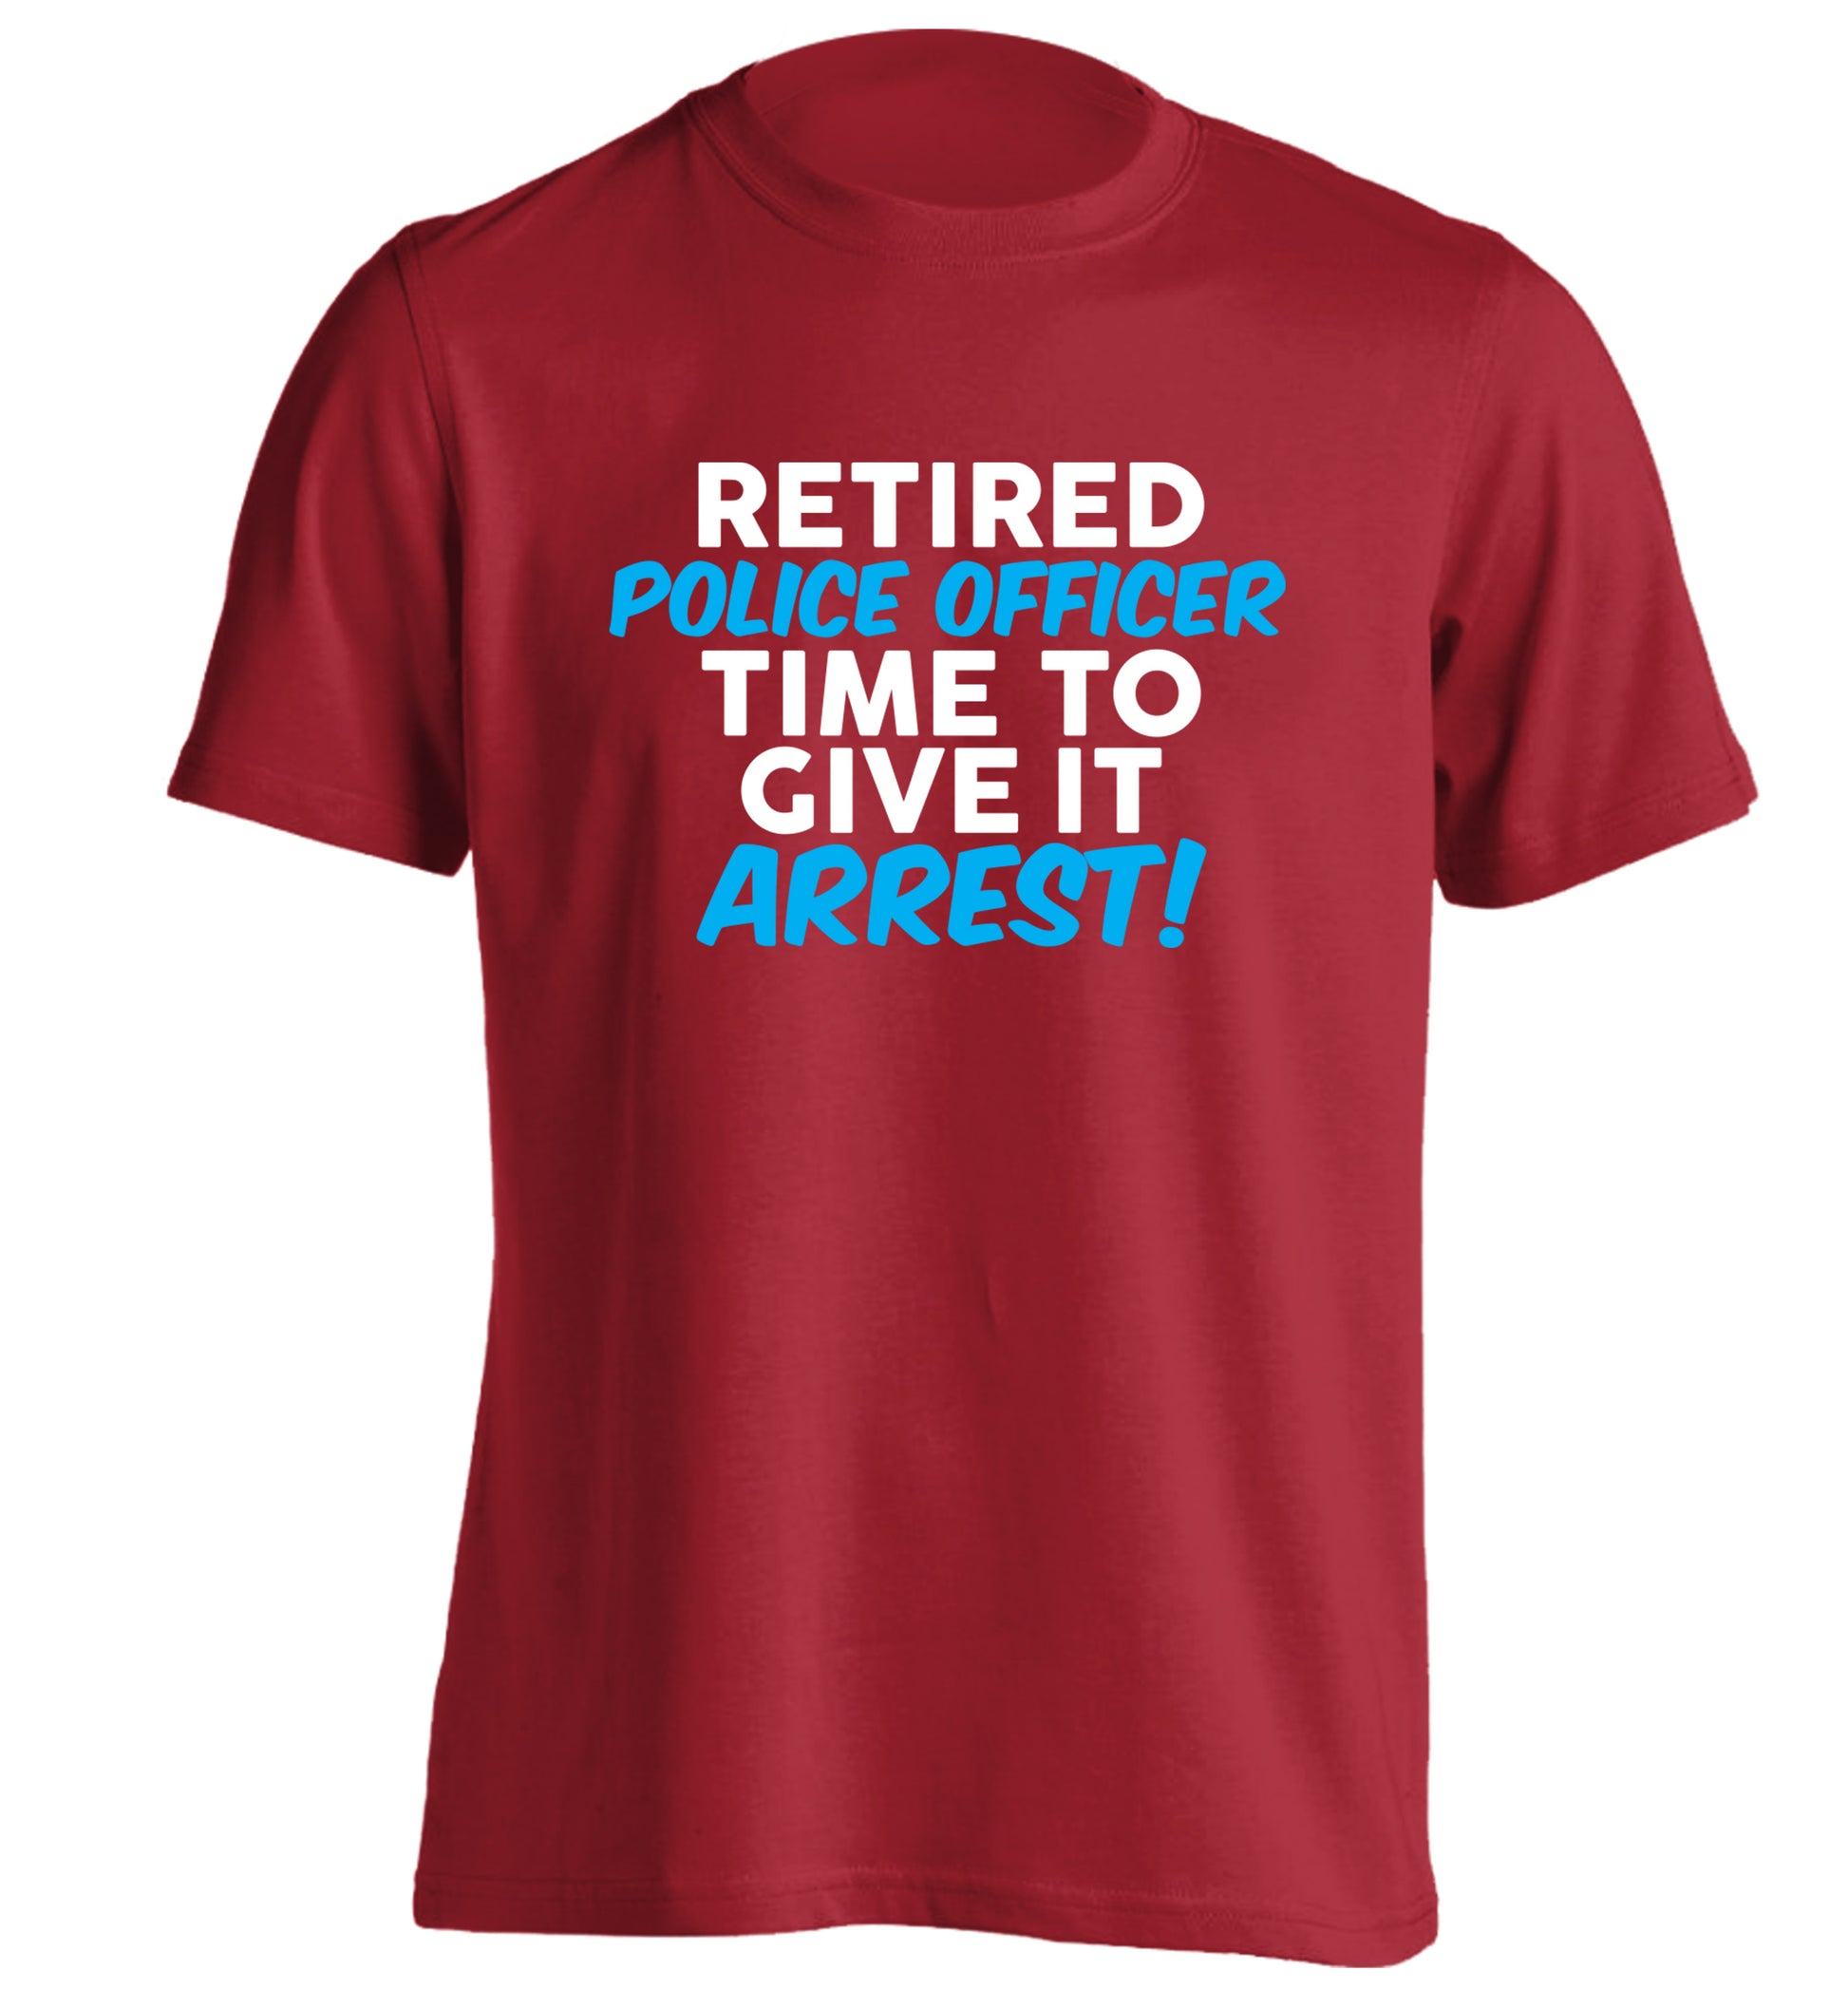 Retired police officer time to give it arrest adults unisex red Tshirt 2XL